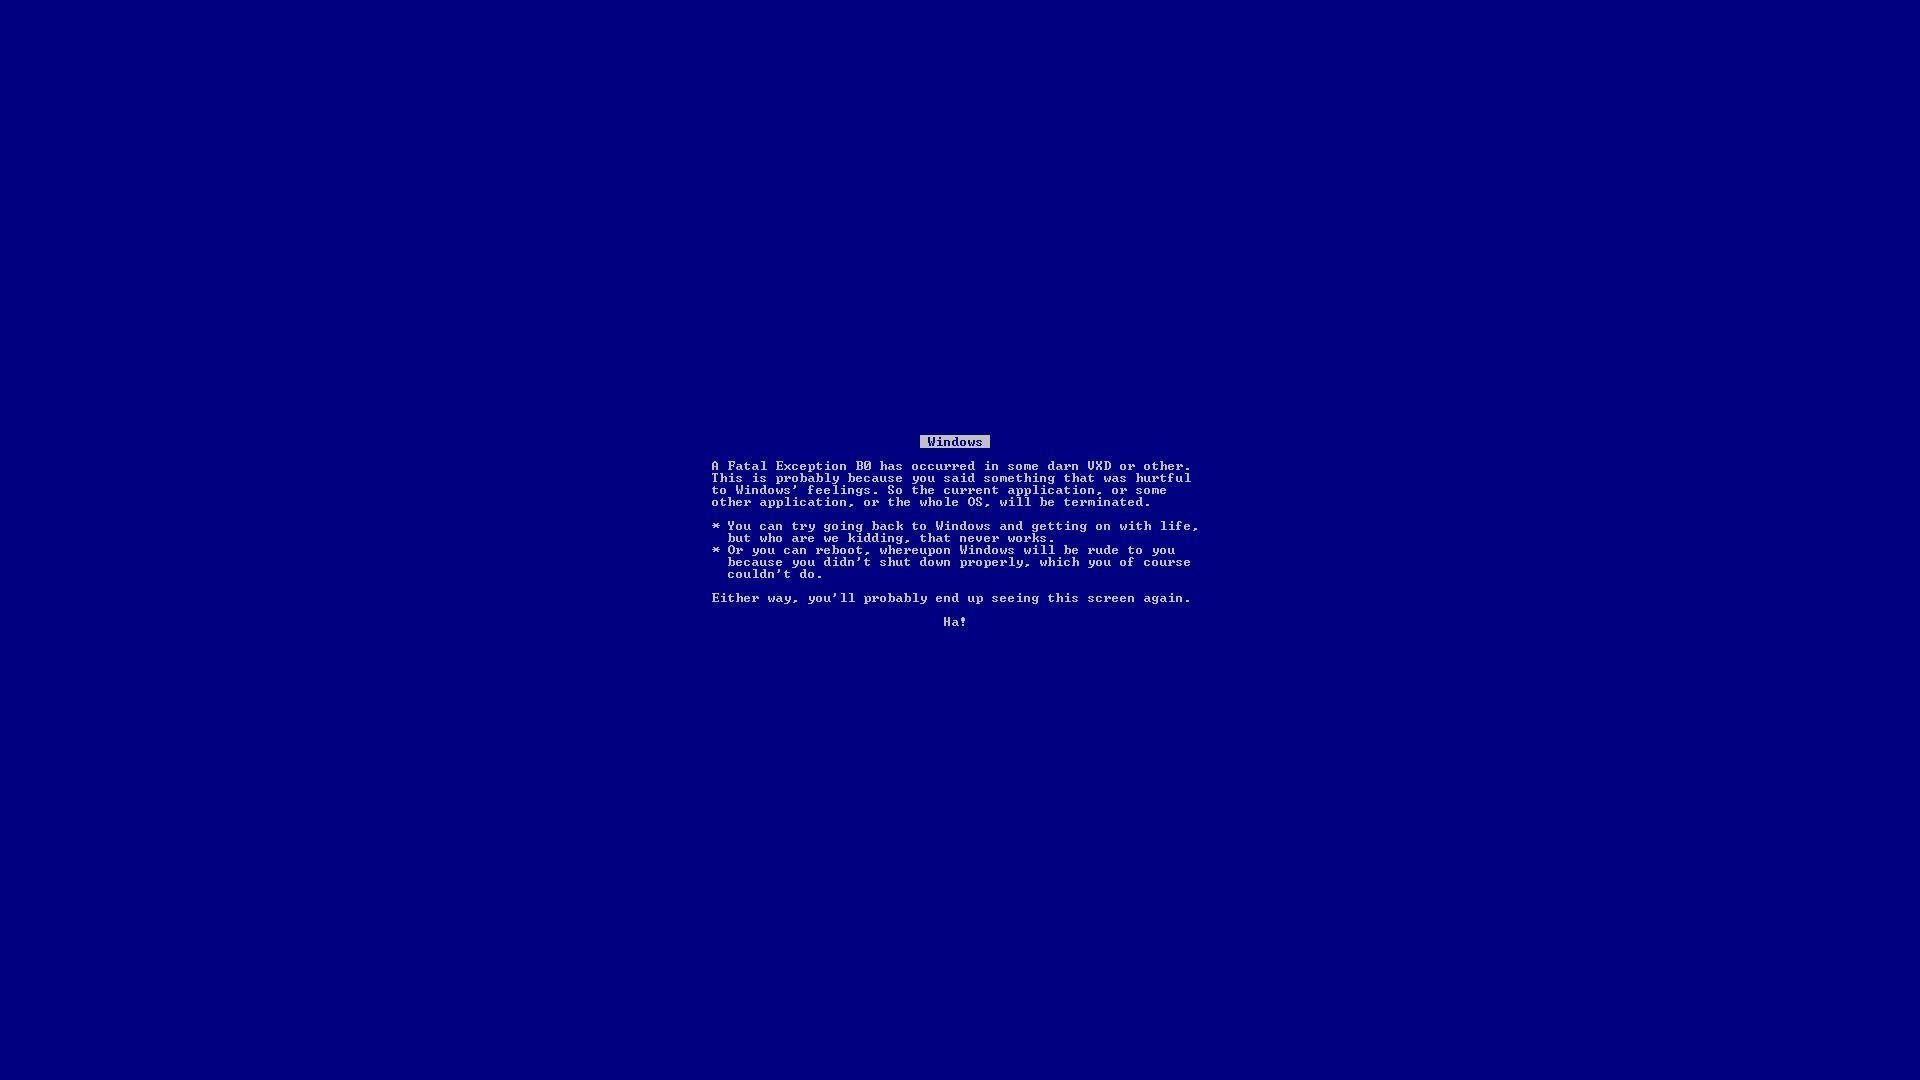 The blue screen of death on a computer - Windows 95